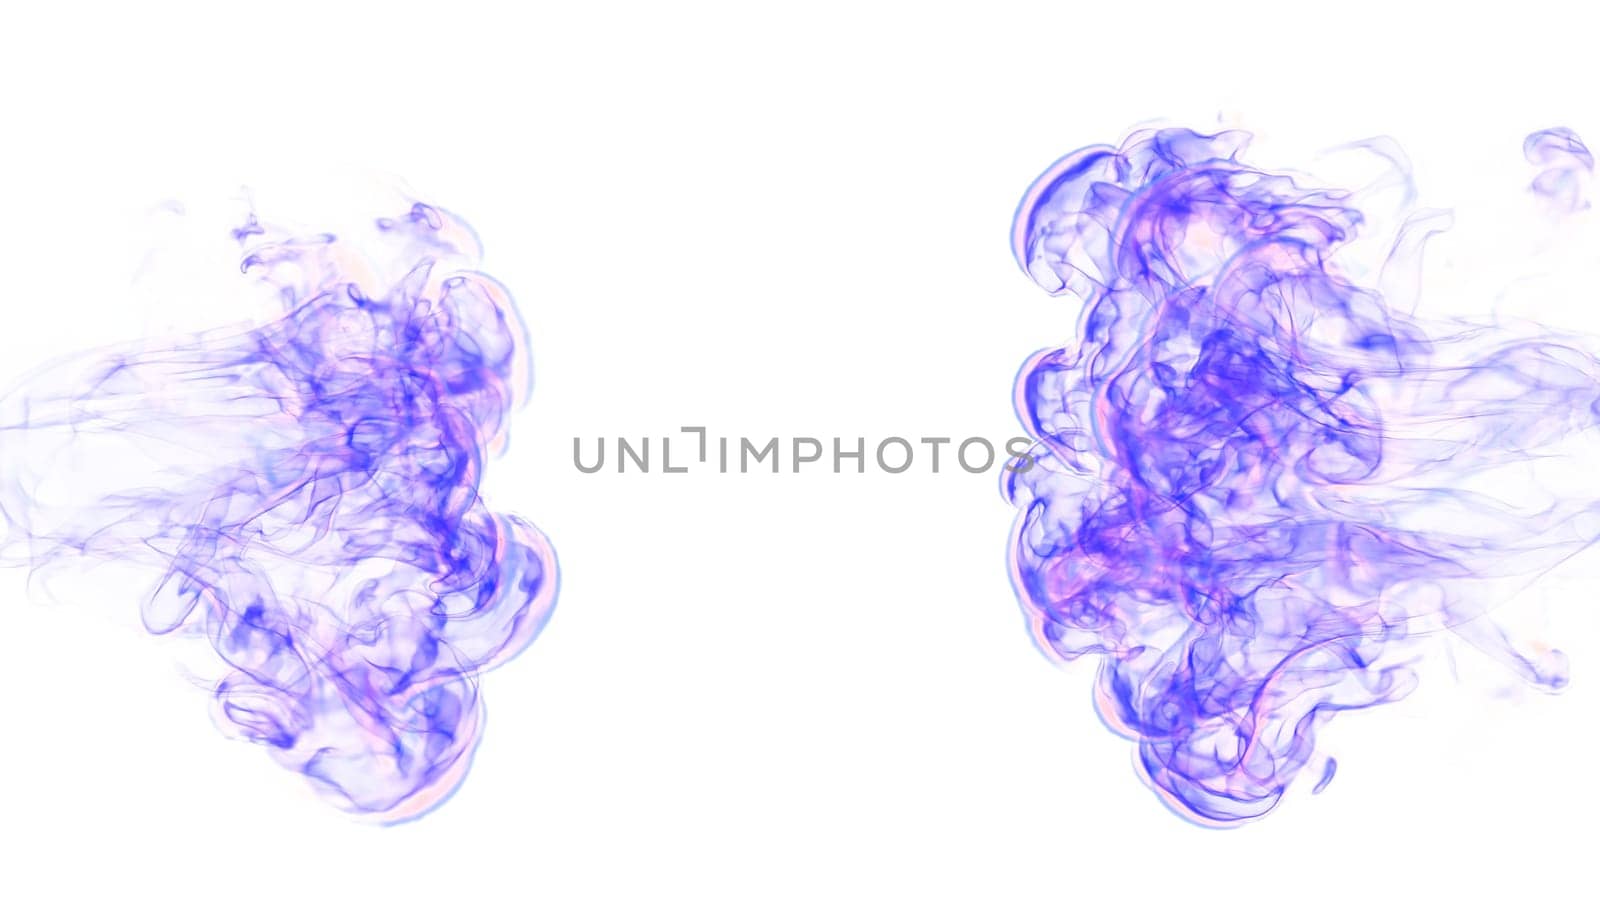 3d illustration. Tongues of lilac flame collide from opposite sides on a white background